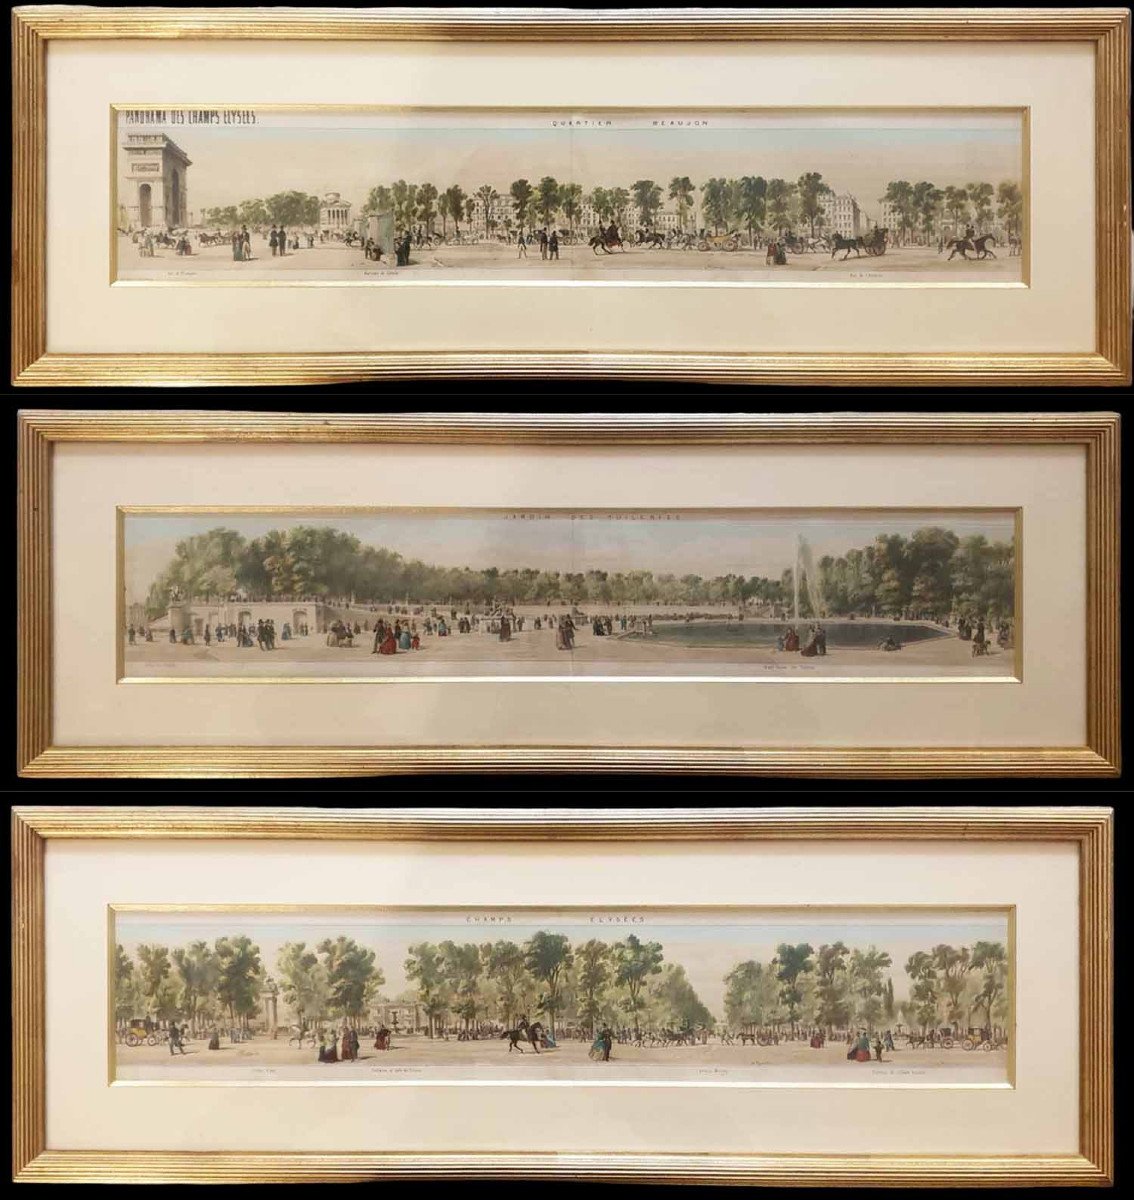 PANORAMA des CHAMPS ELYSEES 1840